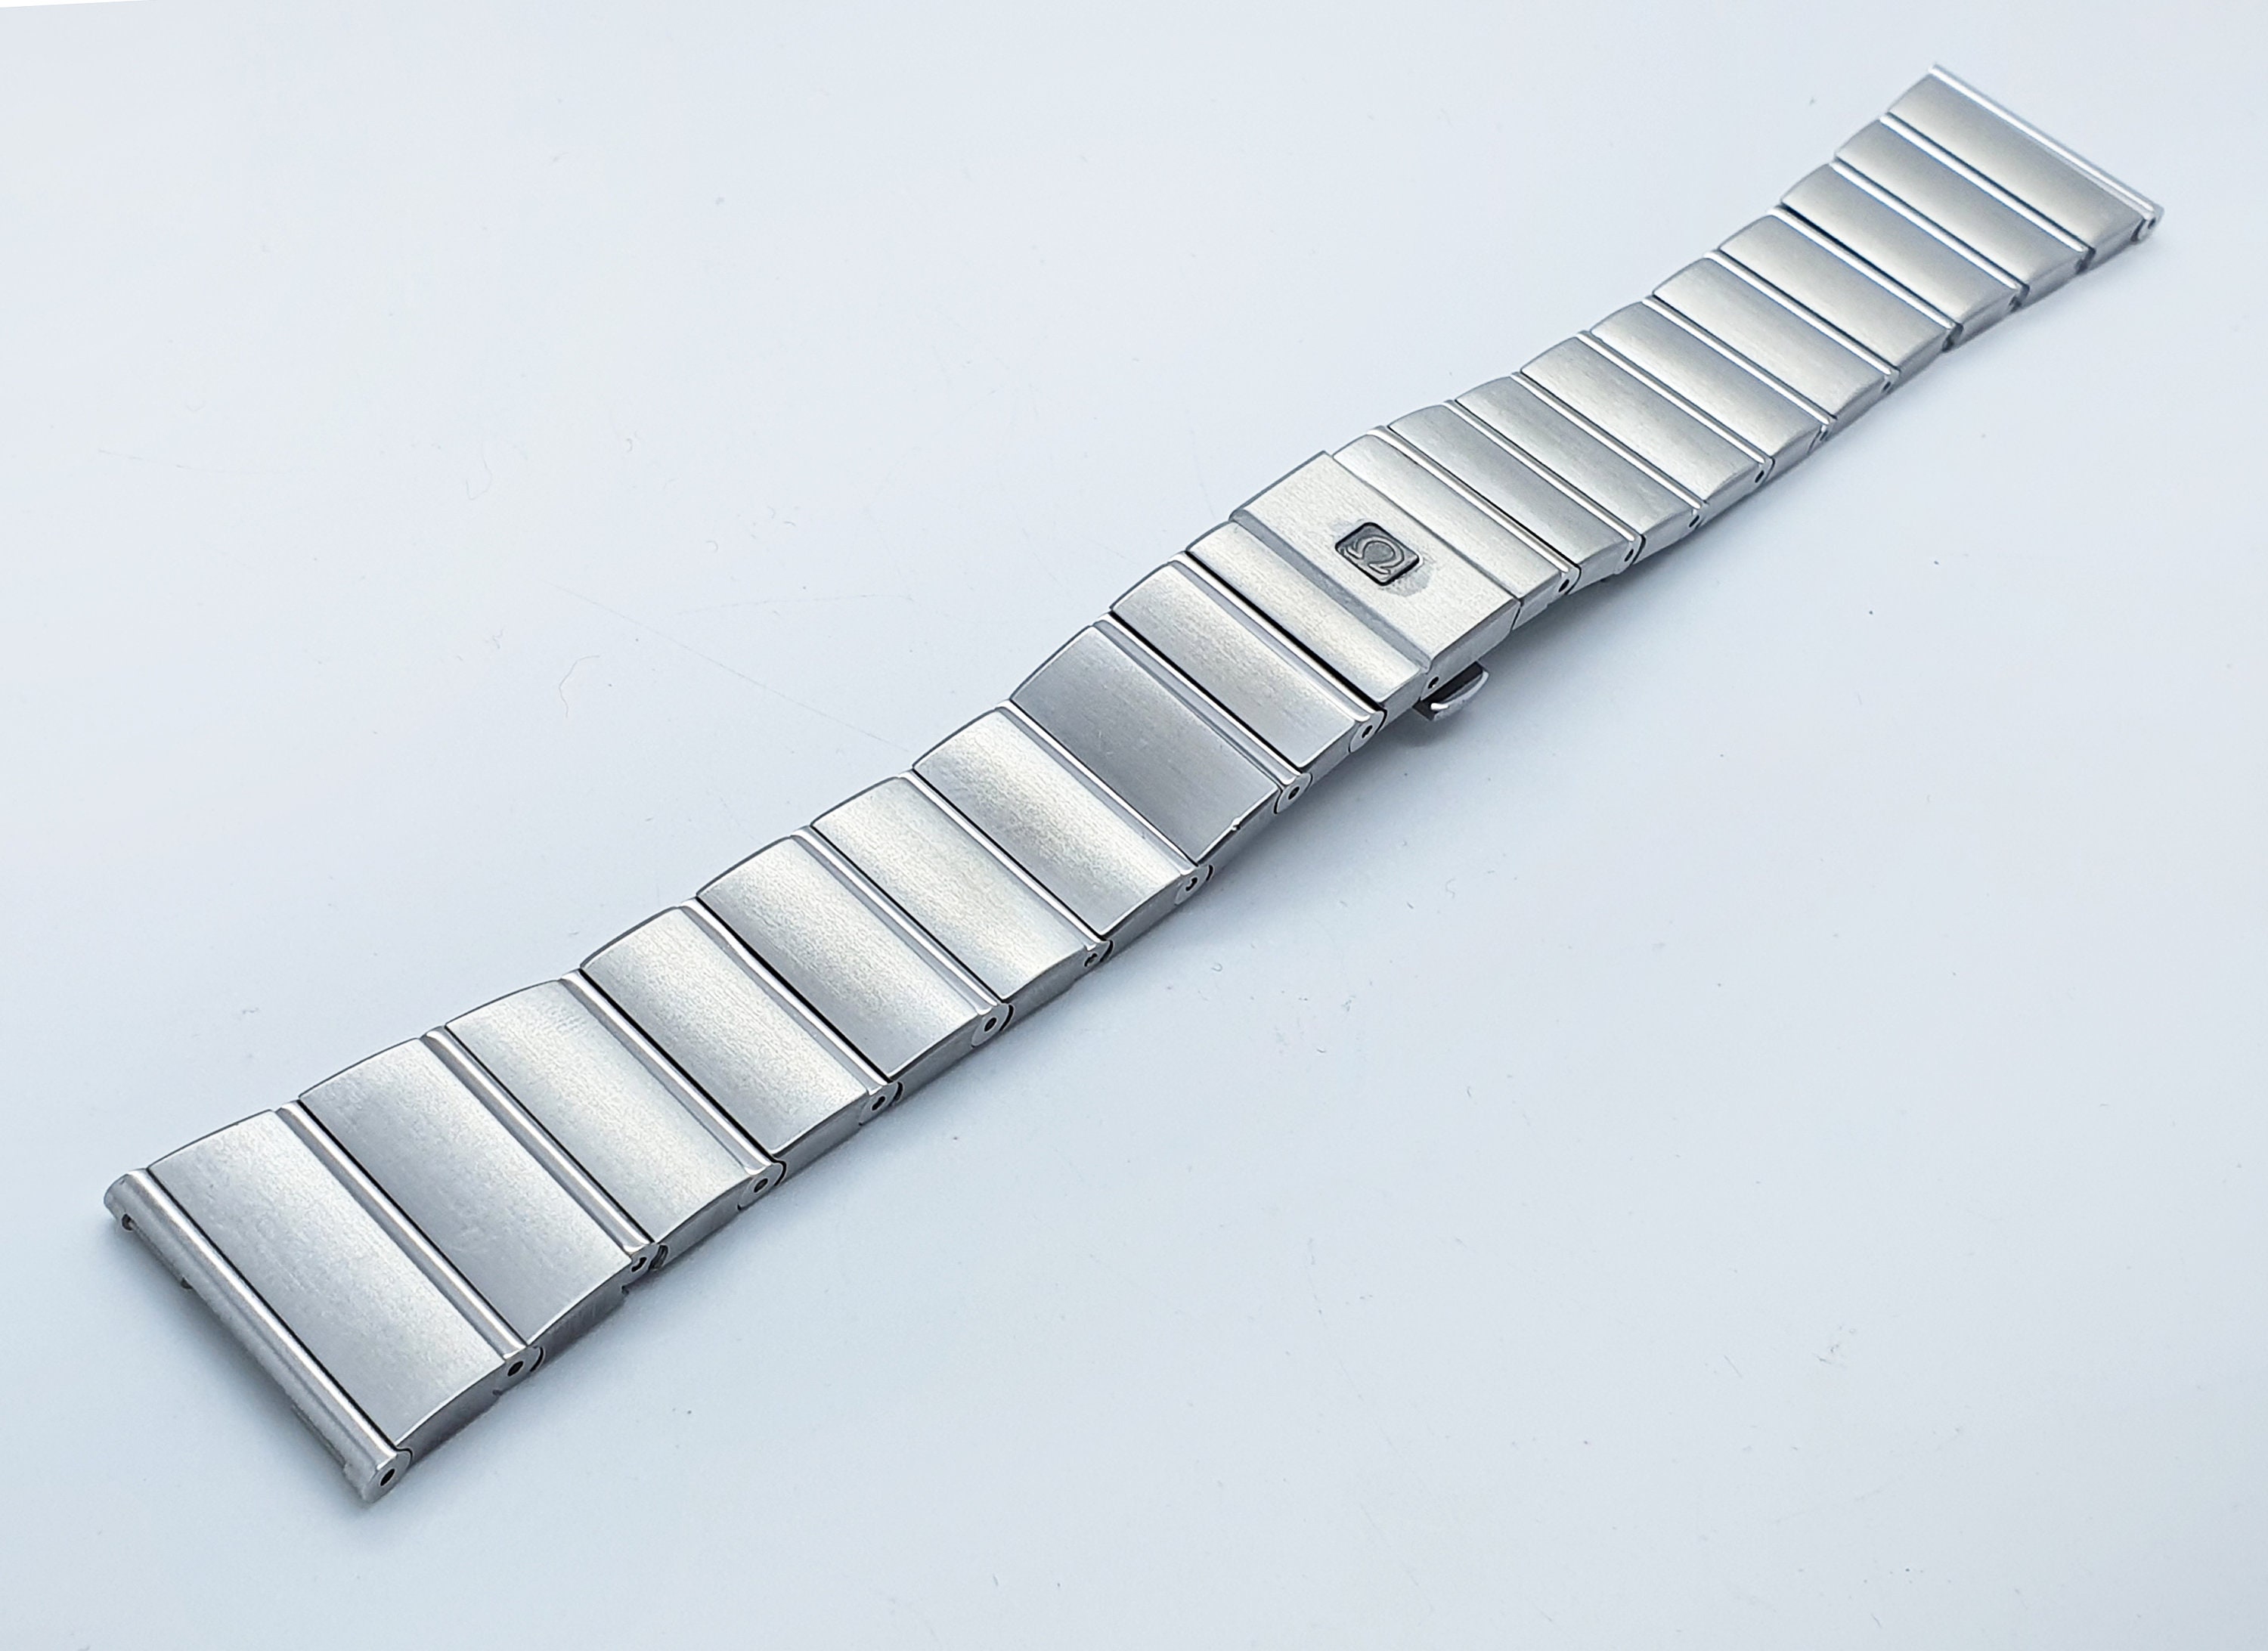 15 17 18 23 25mm Notch End Stainless Steel Replacement Watchband For Omega  Constellation Double Eagle Strap Bracelet Men A Women  Watchbands   AliExpress